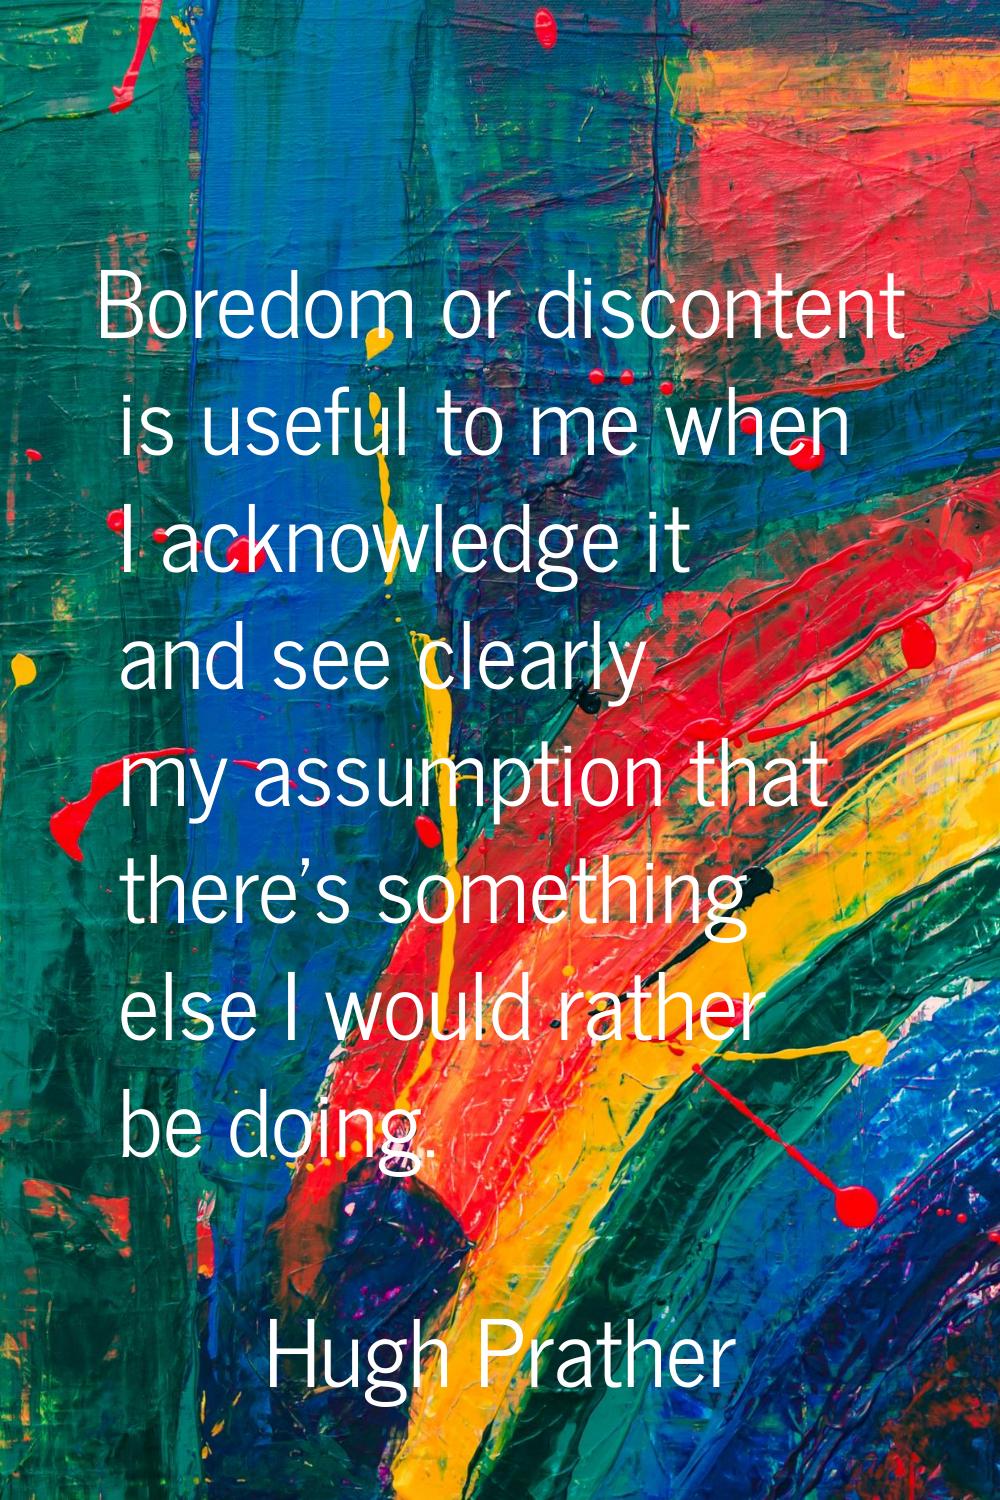 Boredom or discontent is useful to me when I acknowledge it and see clearly my assumption that ther